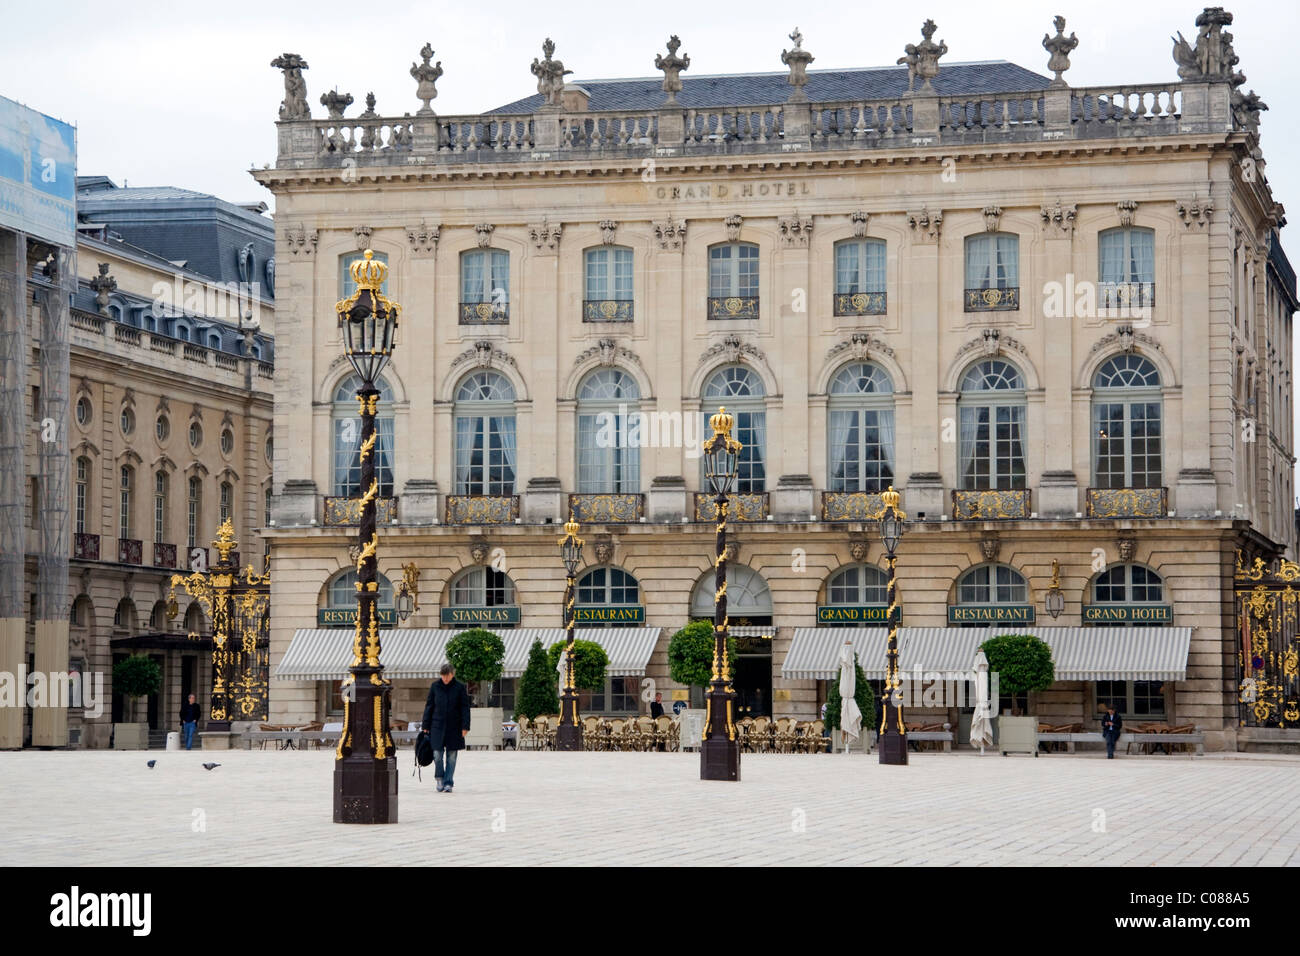 Grand Hotel at Place Stanislas in Nancy, Lorraine, France. Stock Photo